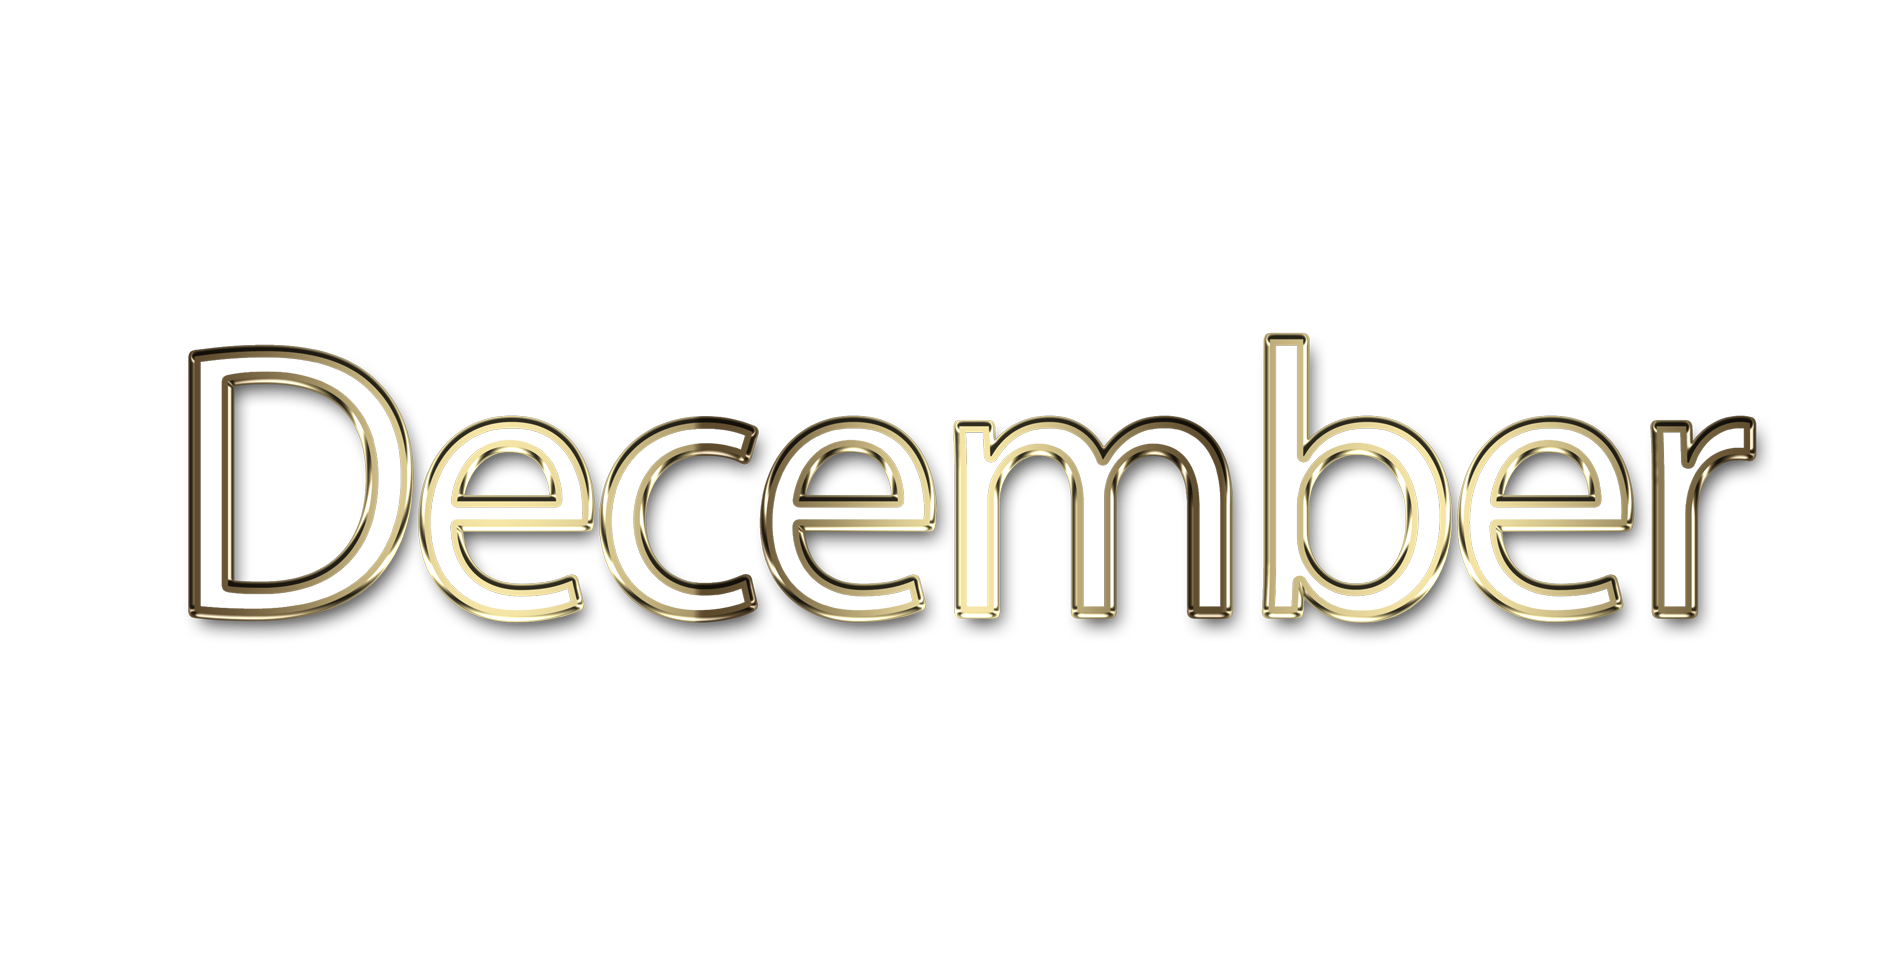 December png, word December png, December word png, December text png, December letters png, December word art typography PNG images, transparent png